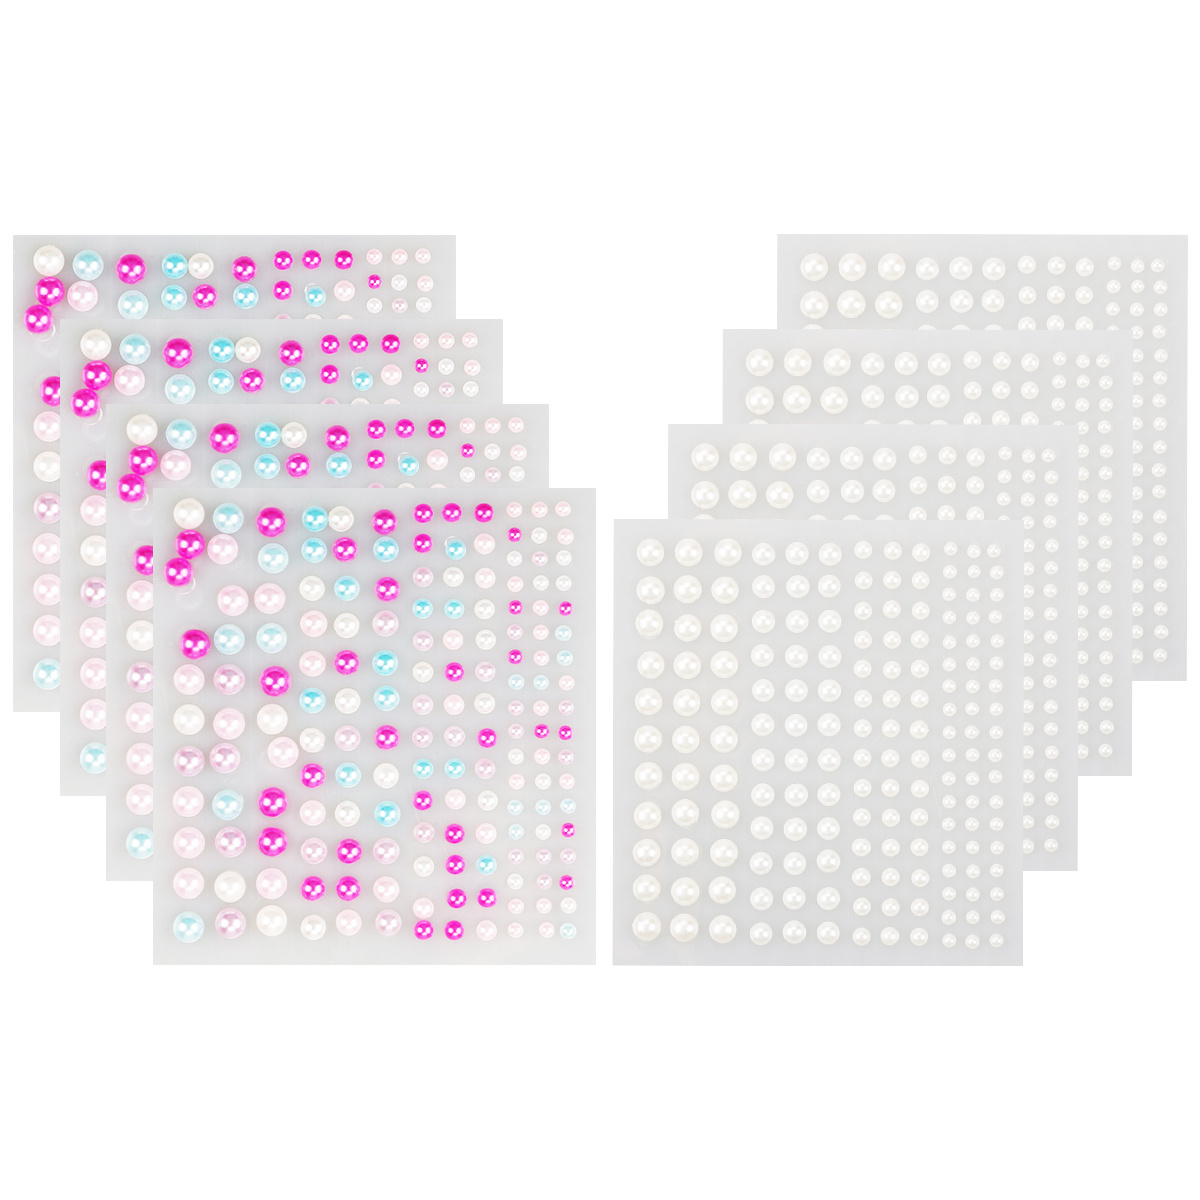 2800Pcs Self-Adhesive Pearl Stickers, White Flat Back Pearls Gems Sticker  for Face Beauty Makeup Nail Art Phone DIY Crafts Scrapbooking